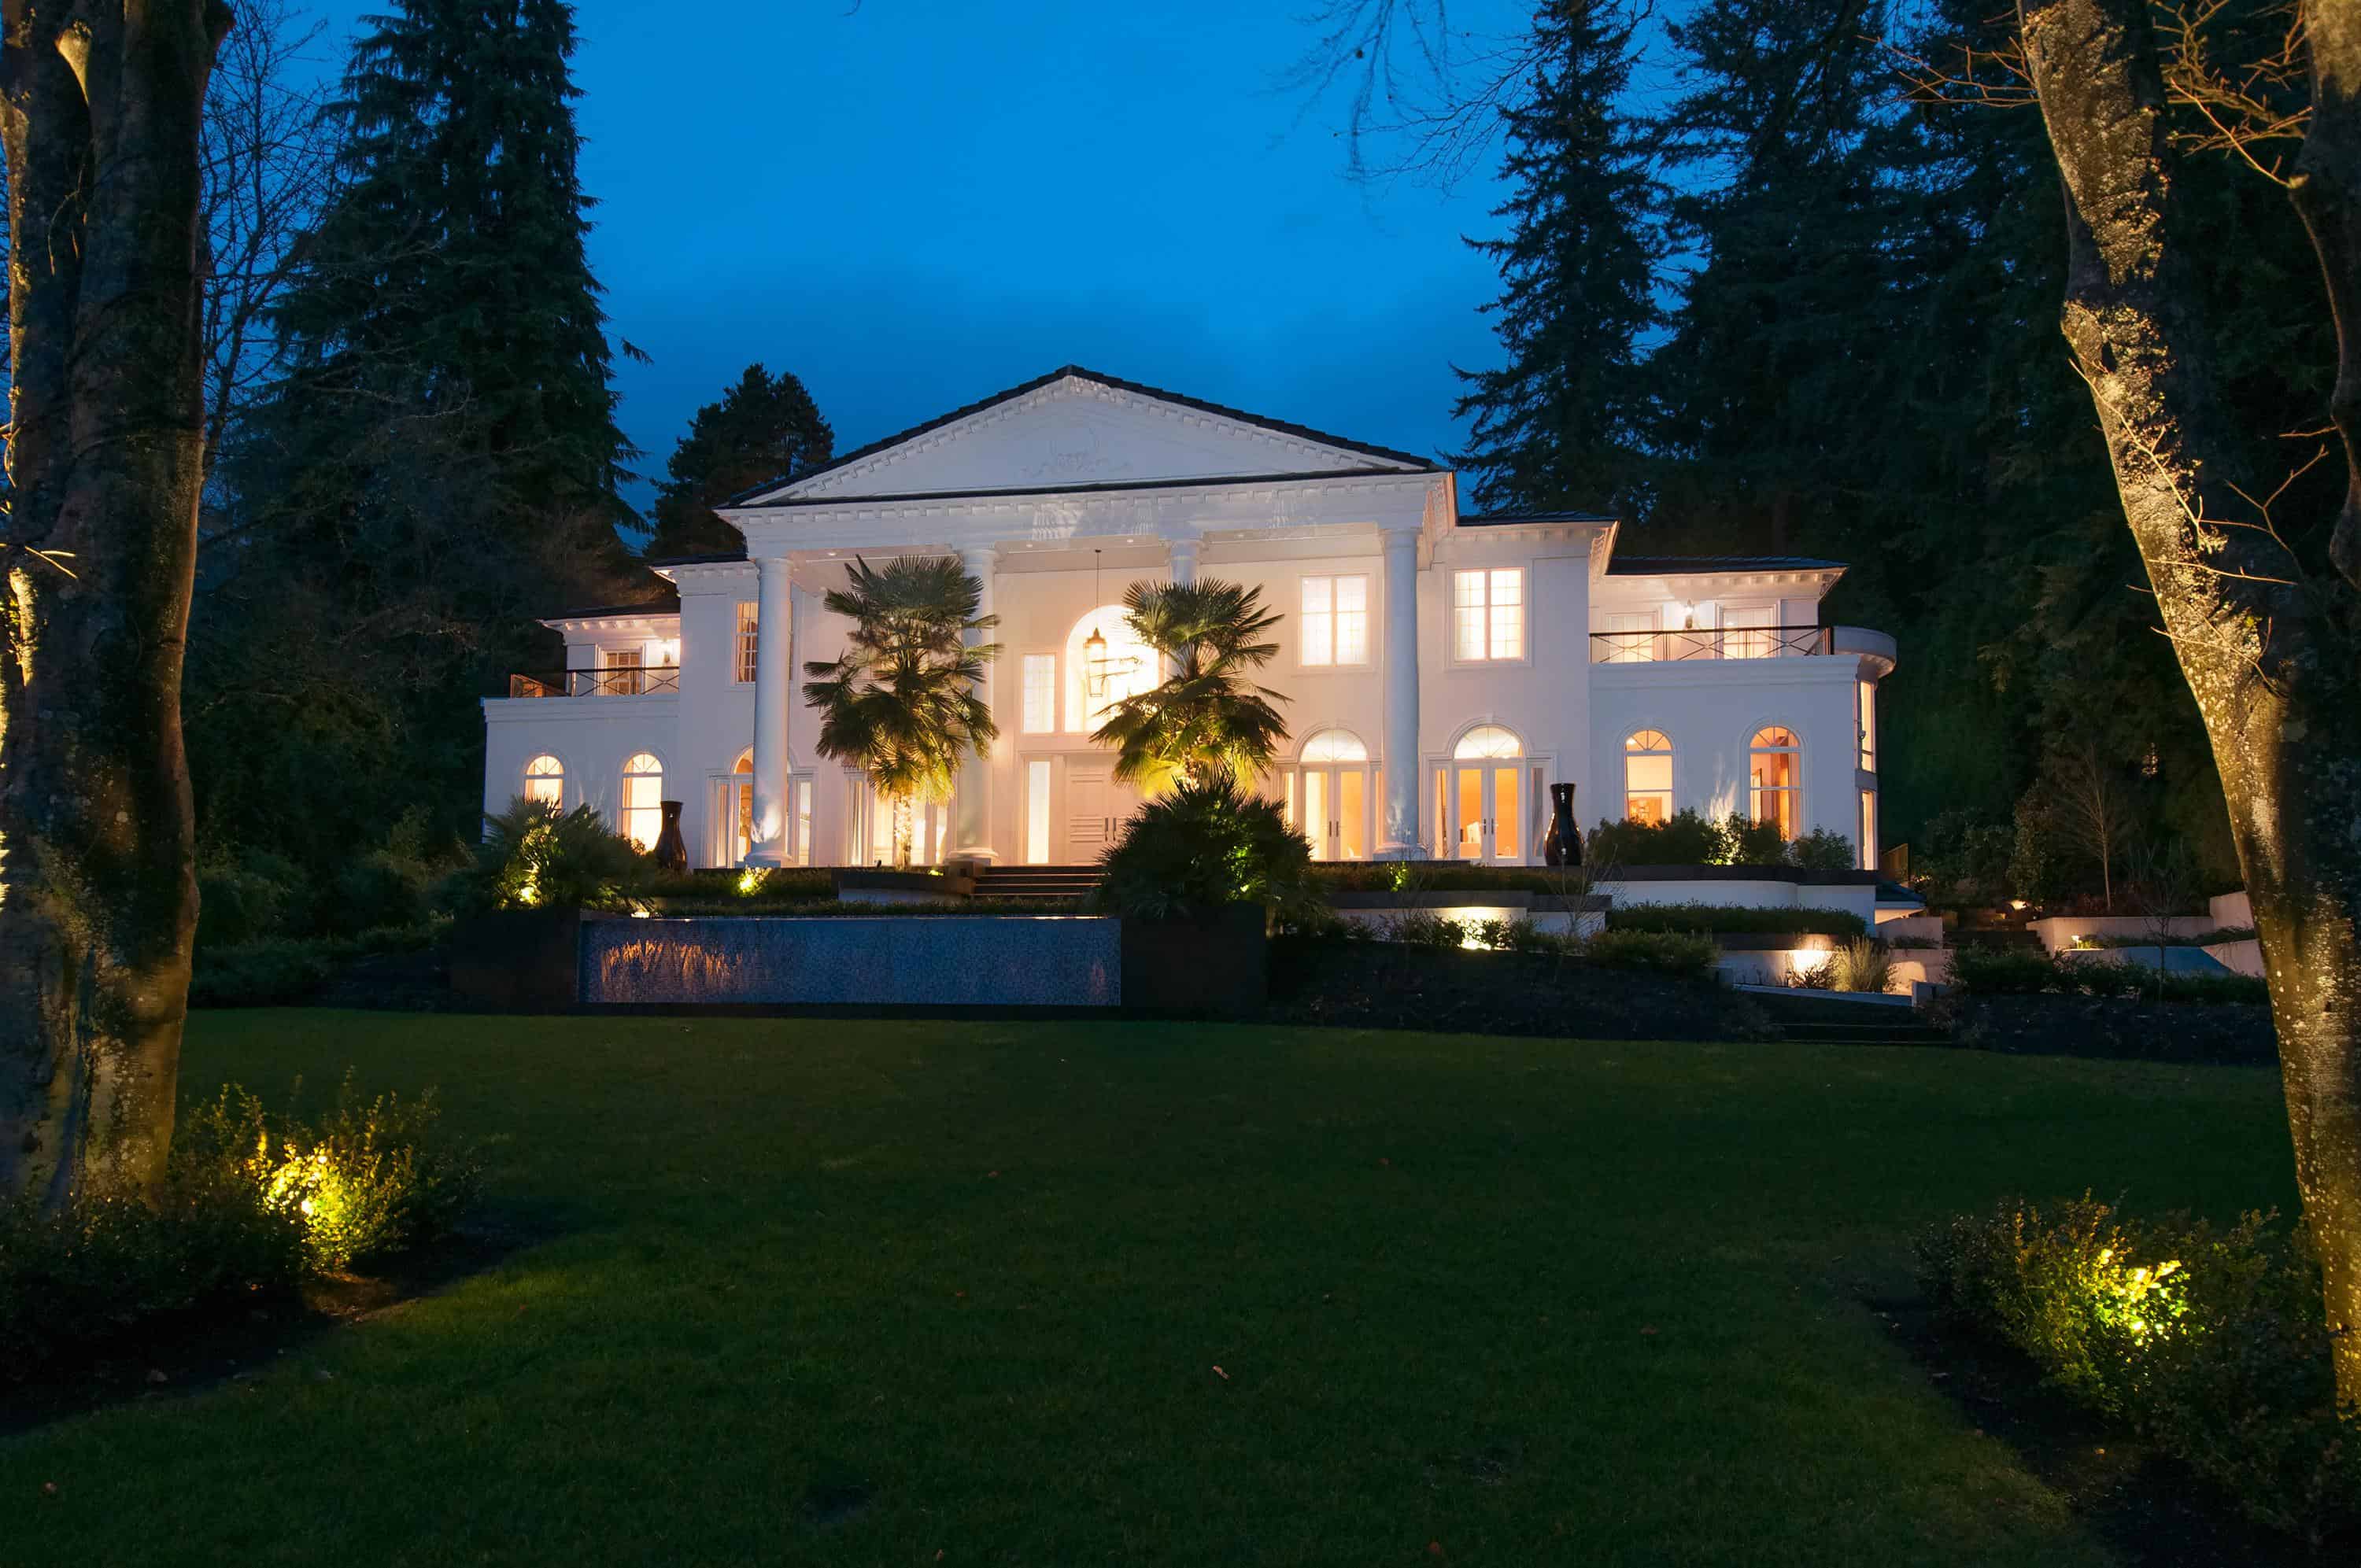 EcoLux☆Lifestyle: West Van’s $22M ‘White House’ is Prime for Entertaining [PHOTOS/VIDEO]